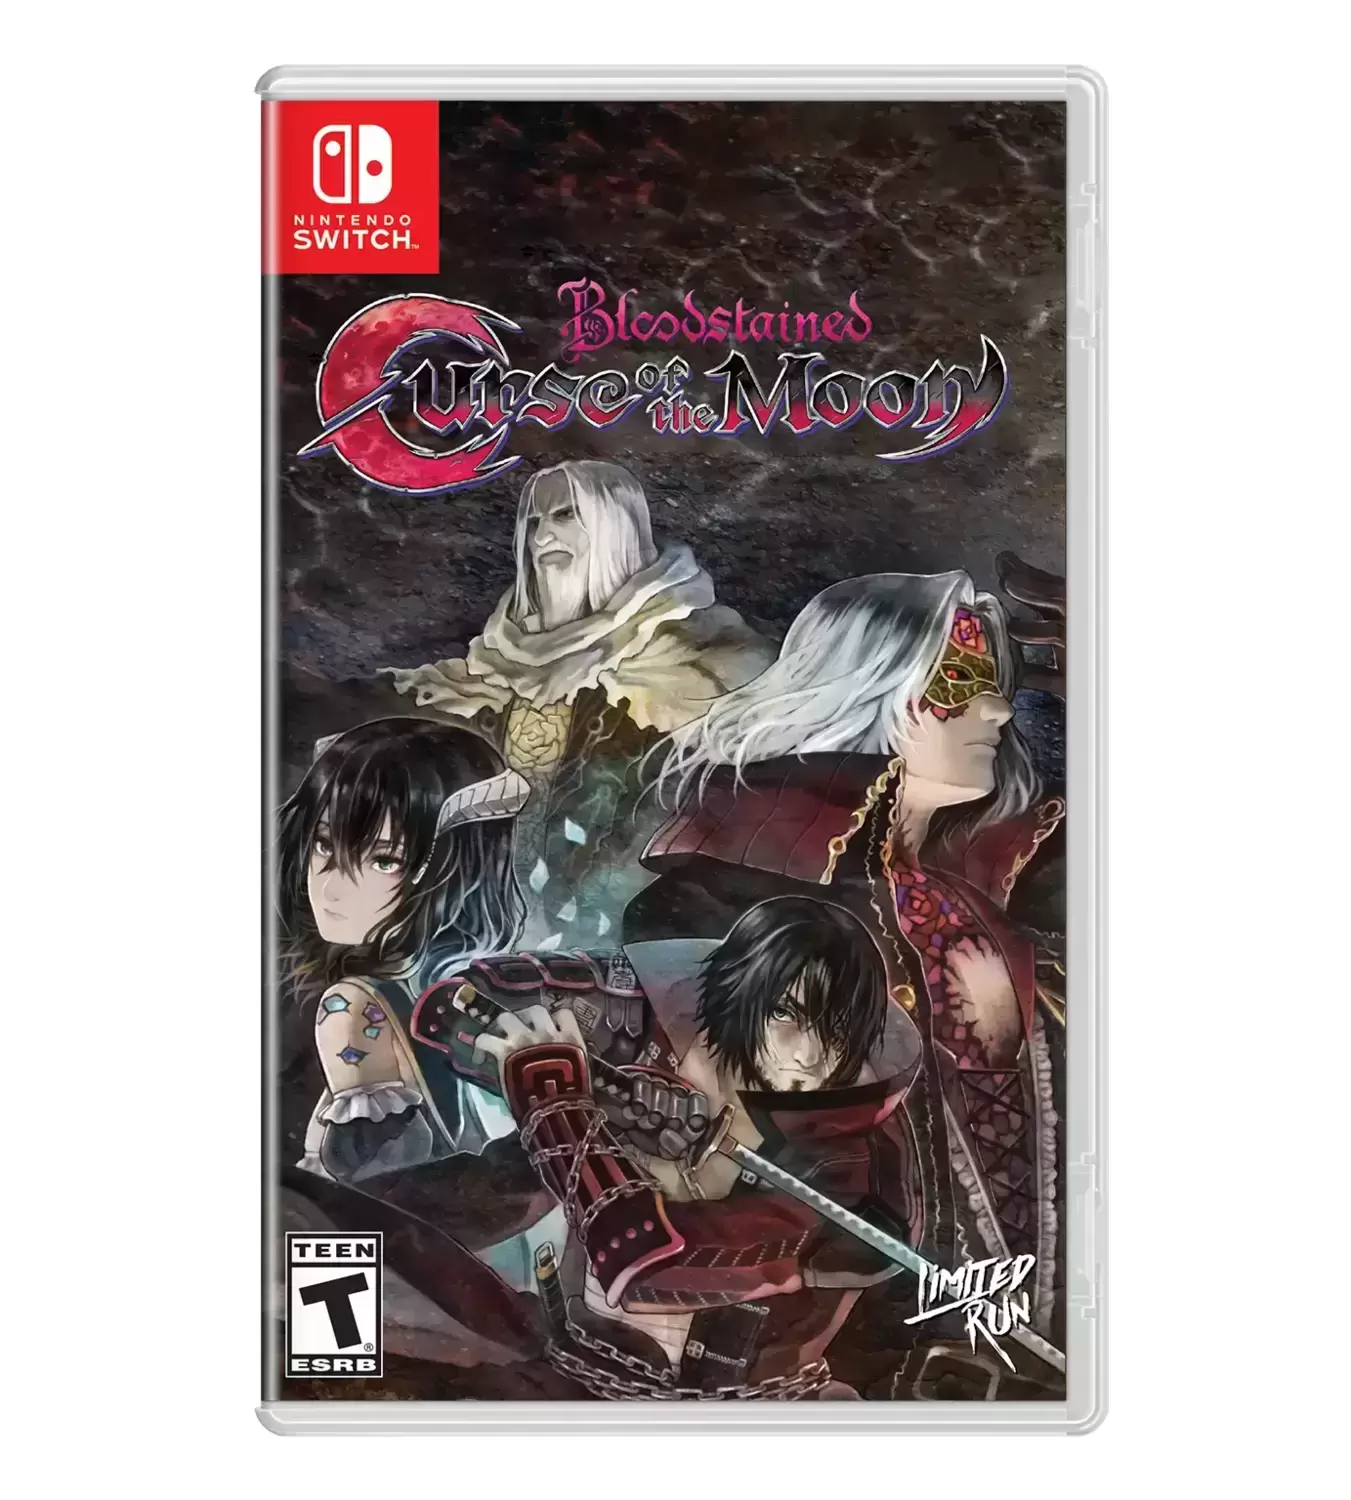 Jeux Nintendo Switch - Bloodstained: Curse of the moon - Best buy cover